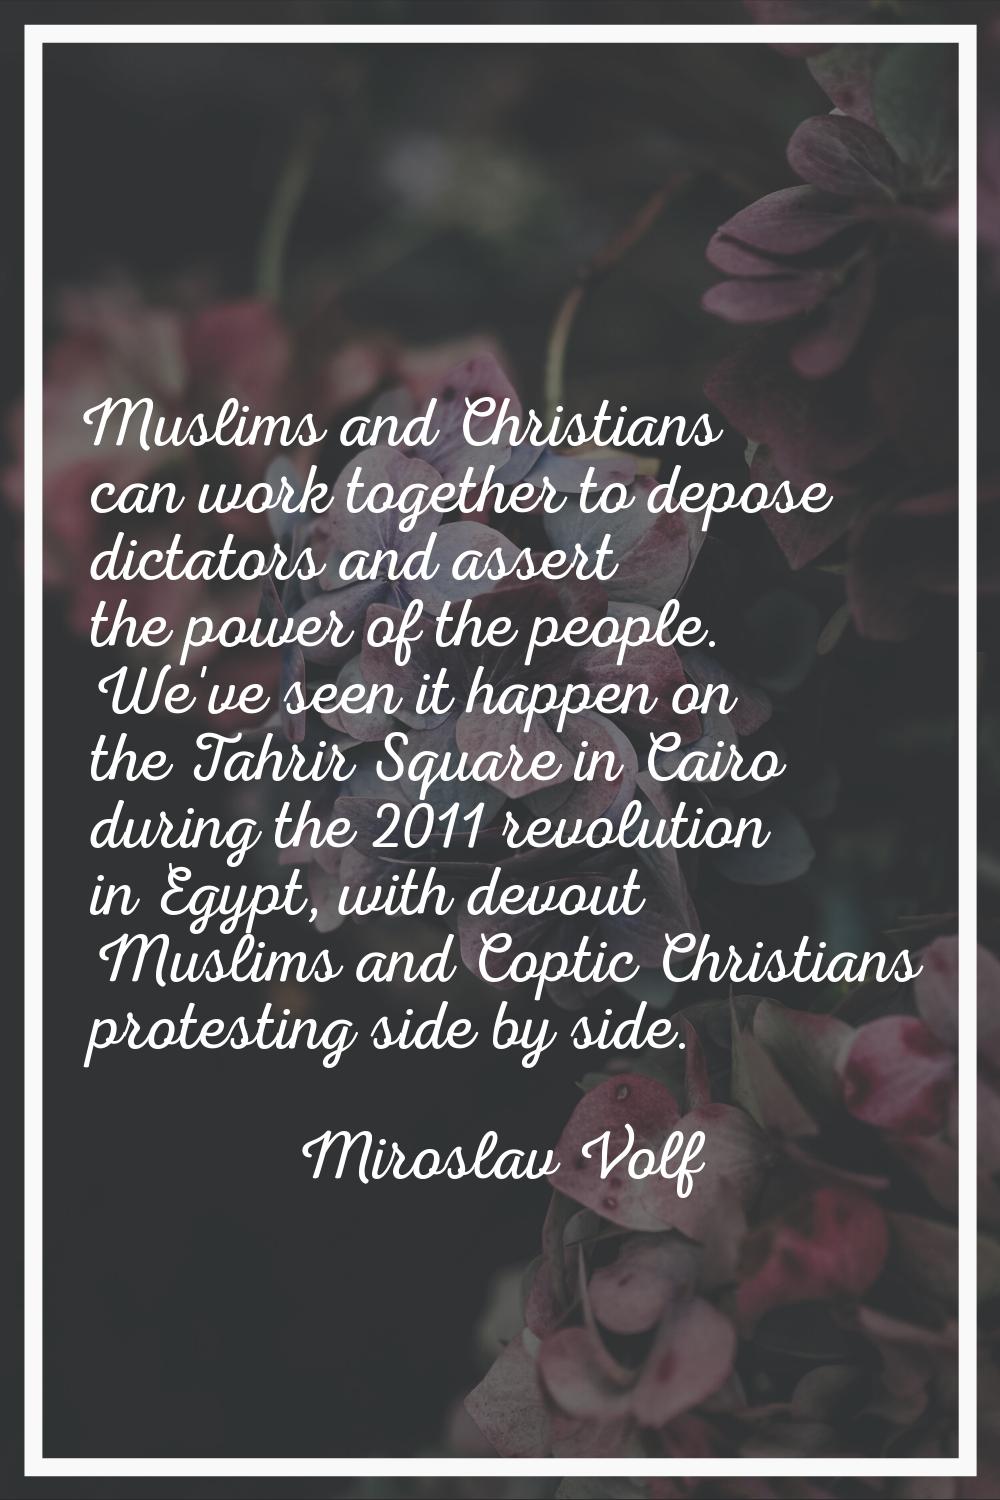 Muslims and Christians can work together to depose dictators and assert the power of the people. We